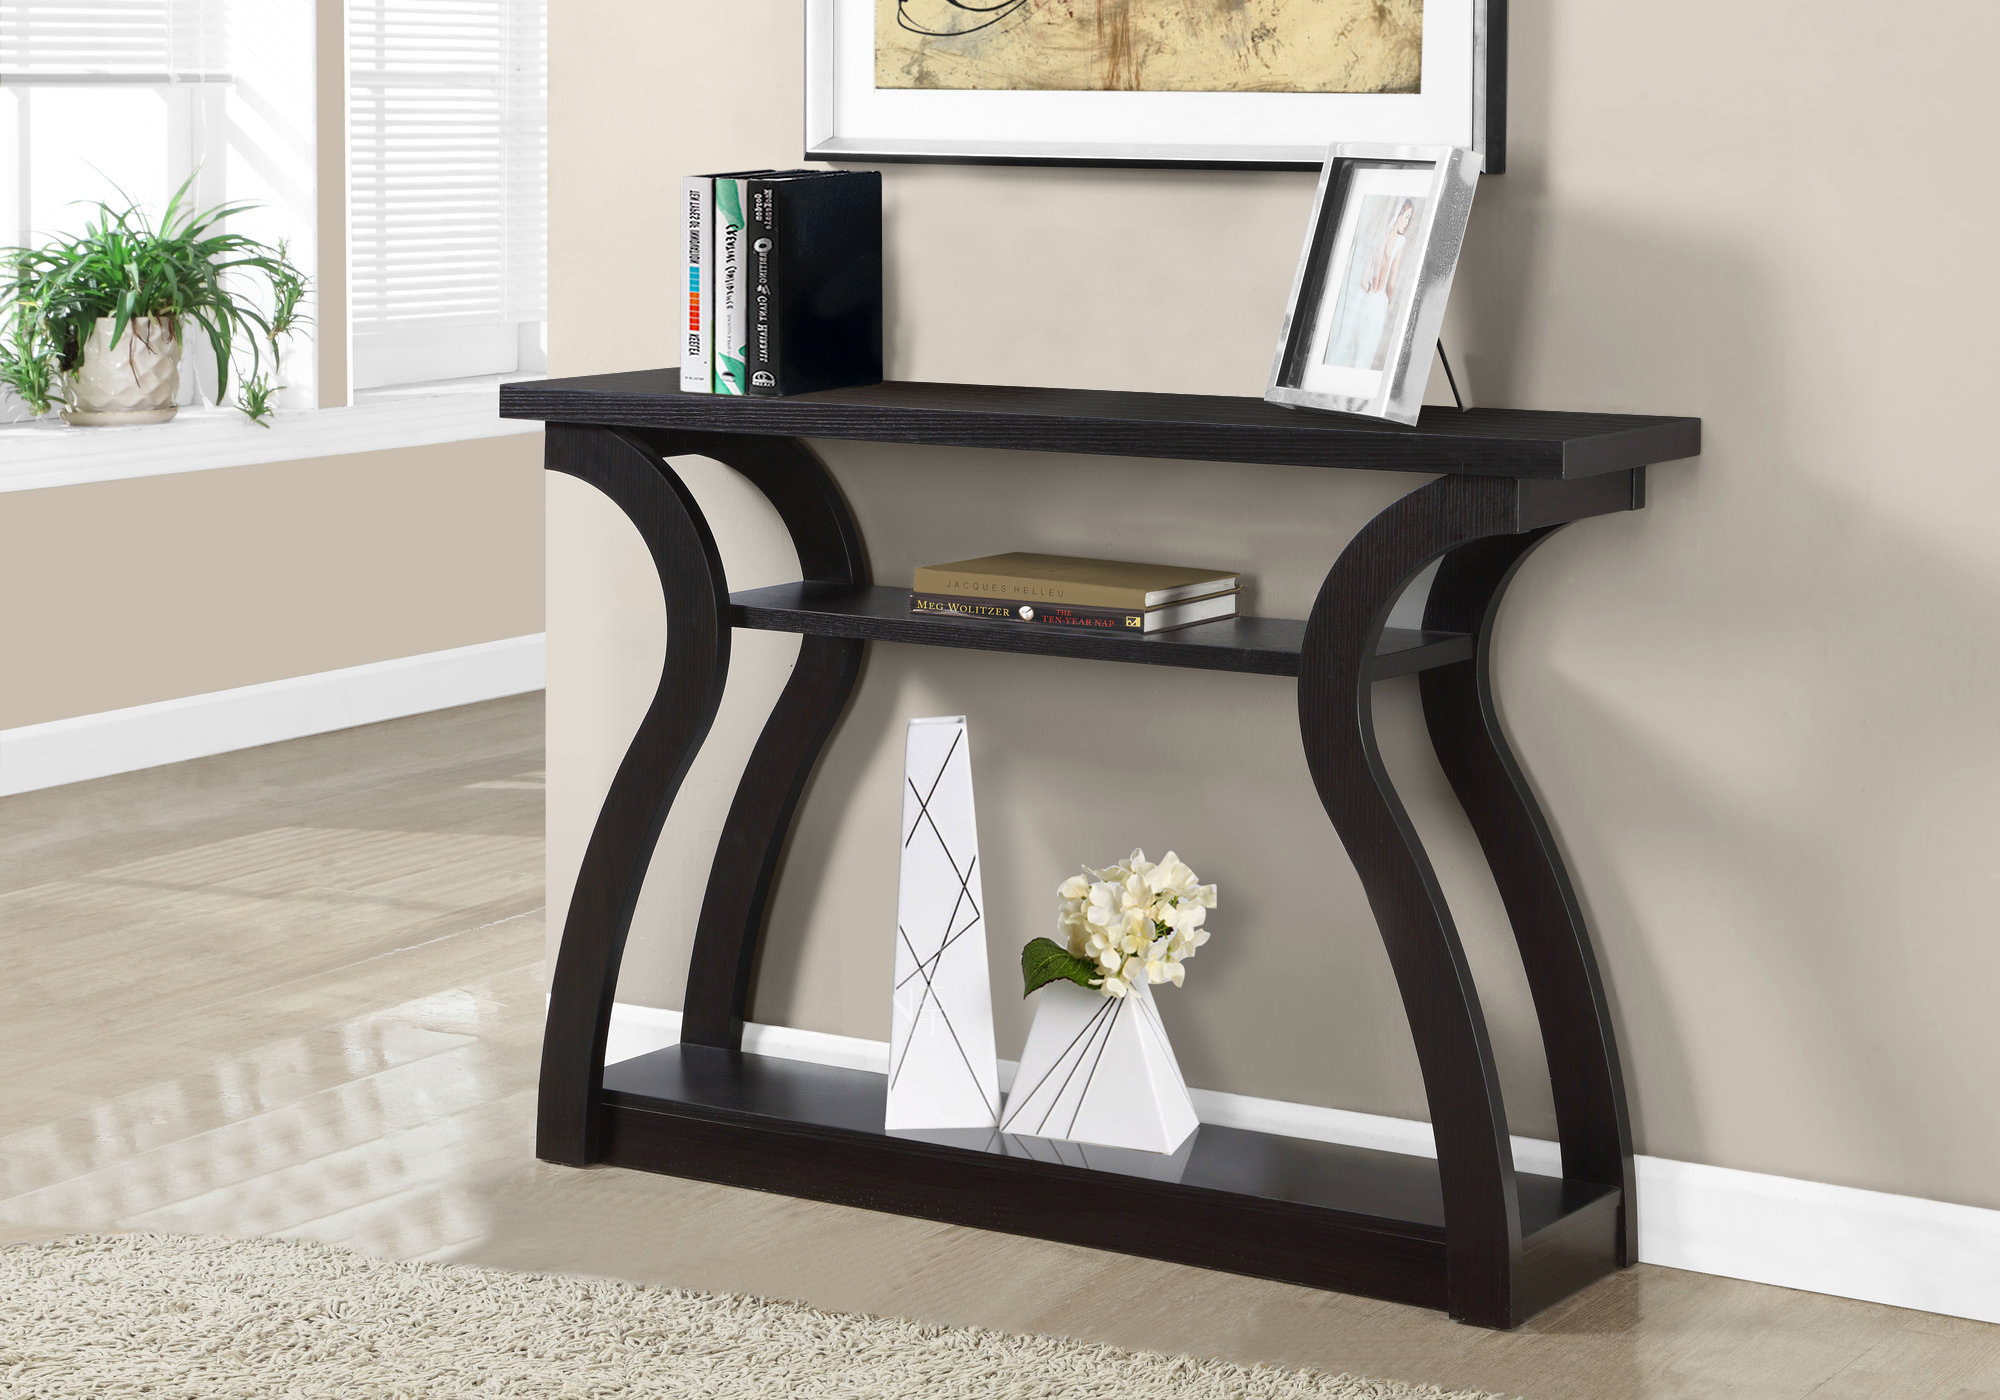 Considerations While Choosing an Accent Table For Your Home Furniture